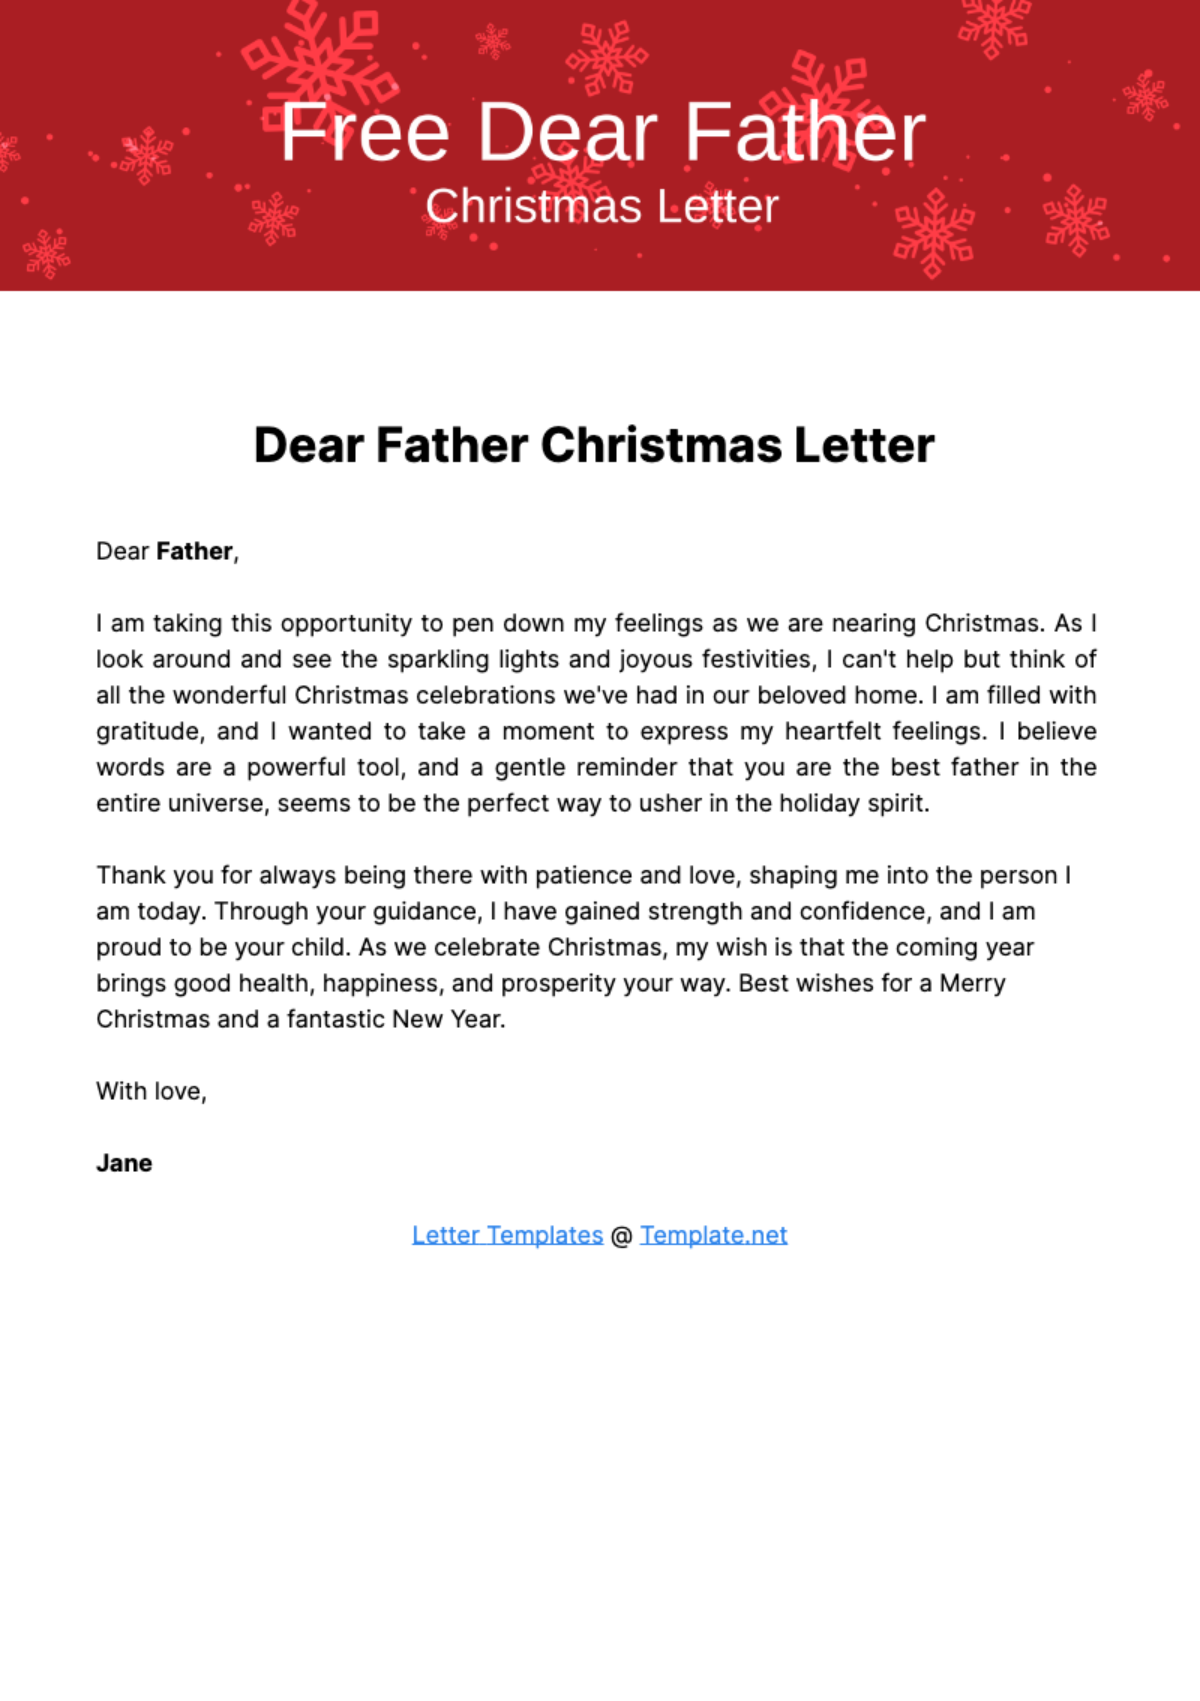 Dear Father Christmas Letter Template